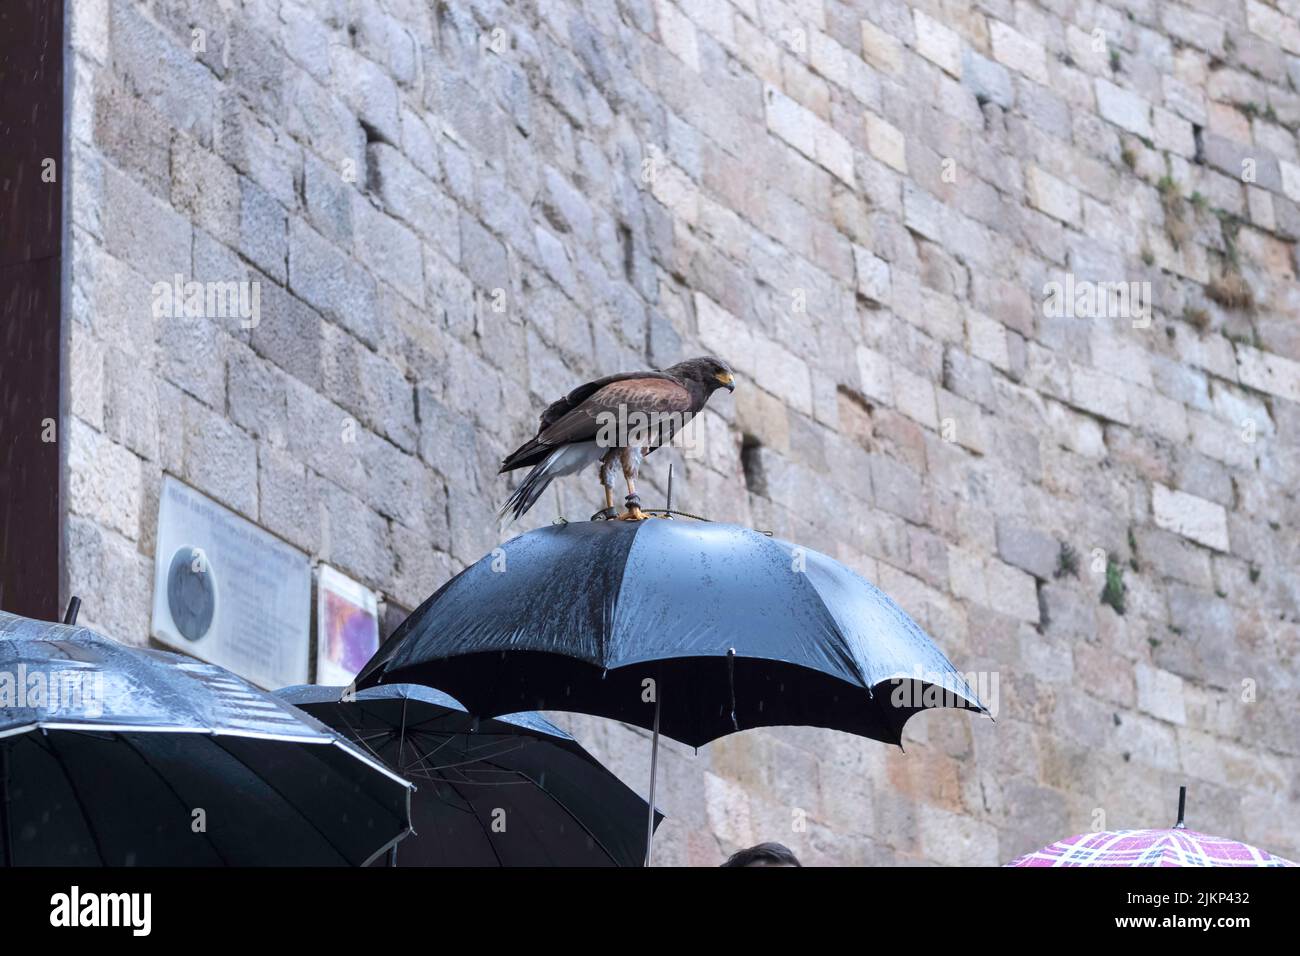 A Harris eagle perching on an umbrella by the stone wall Stock Photo